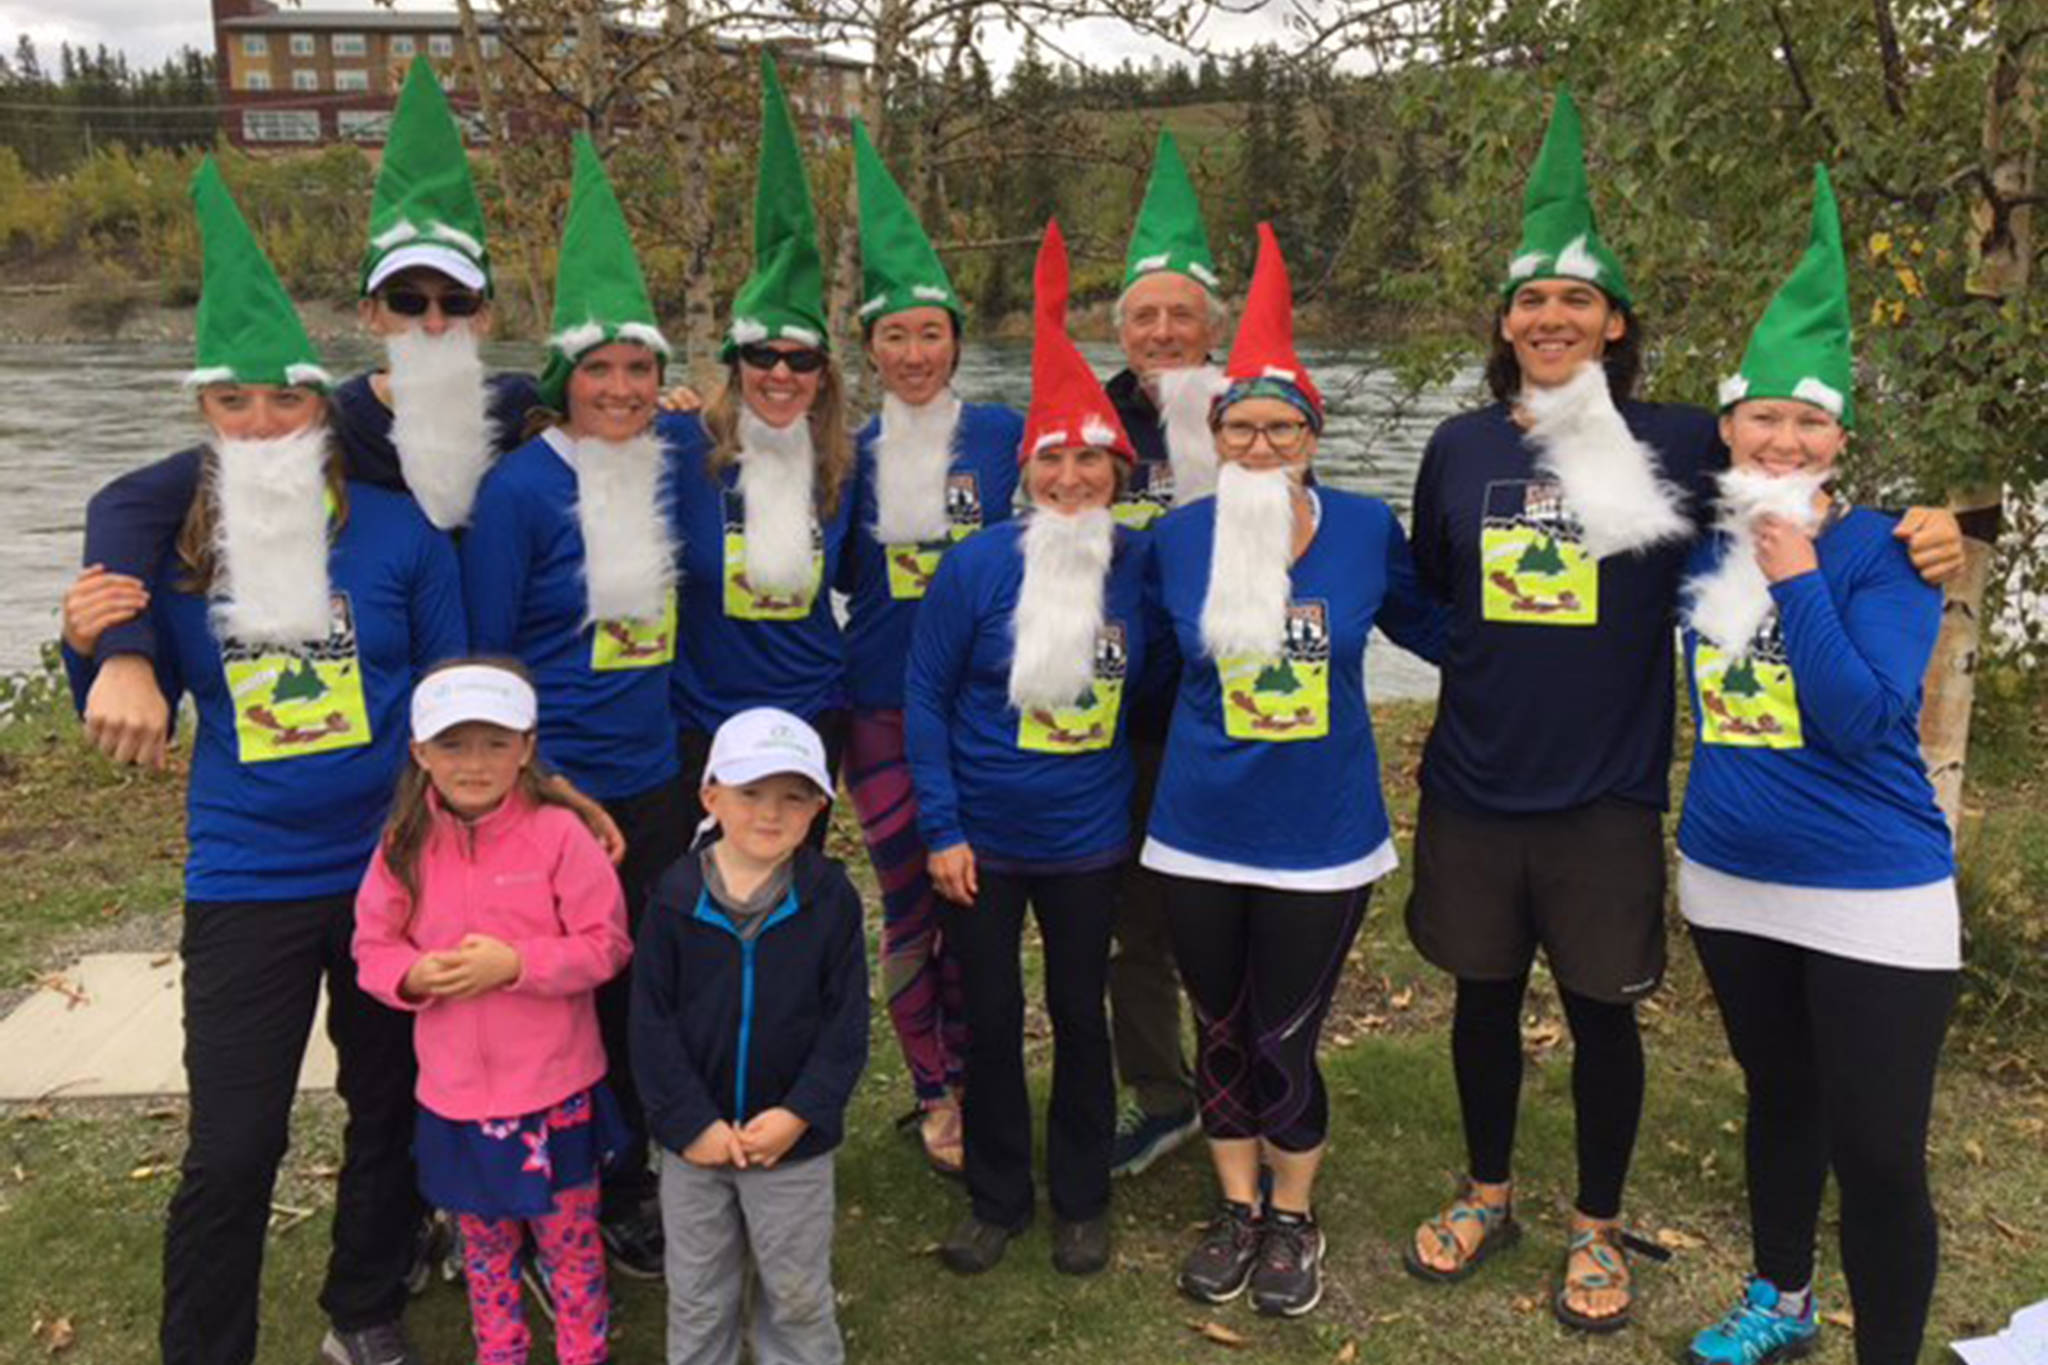 The Chi Trippers, of Juneau, pose after finishing the Klondike Relay in 2018. Kym Mauseth, third from right, is the captain of the team. (Courtesy Photo | Kym Mauseth)